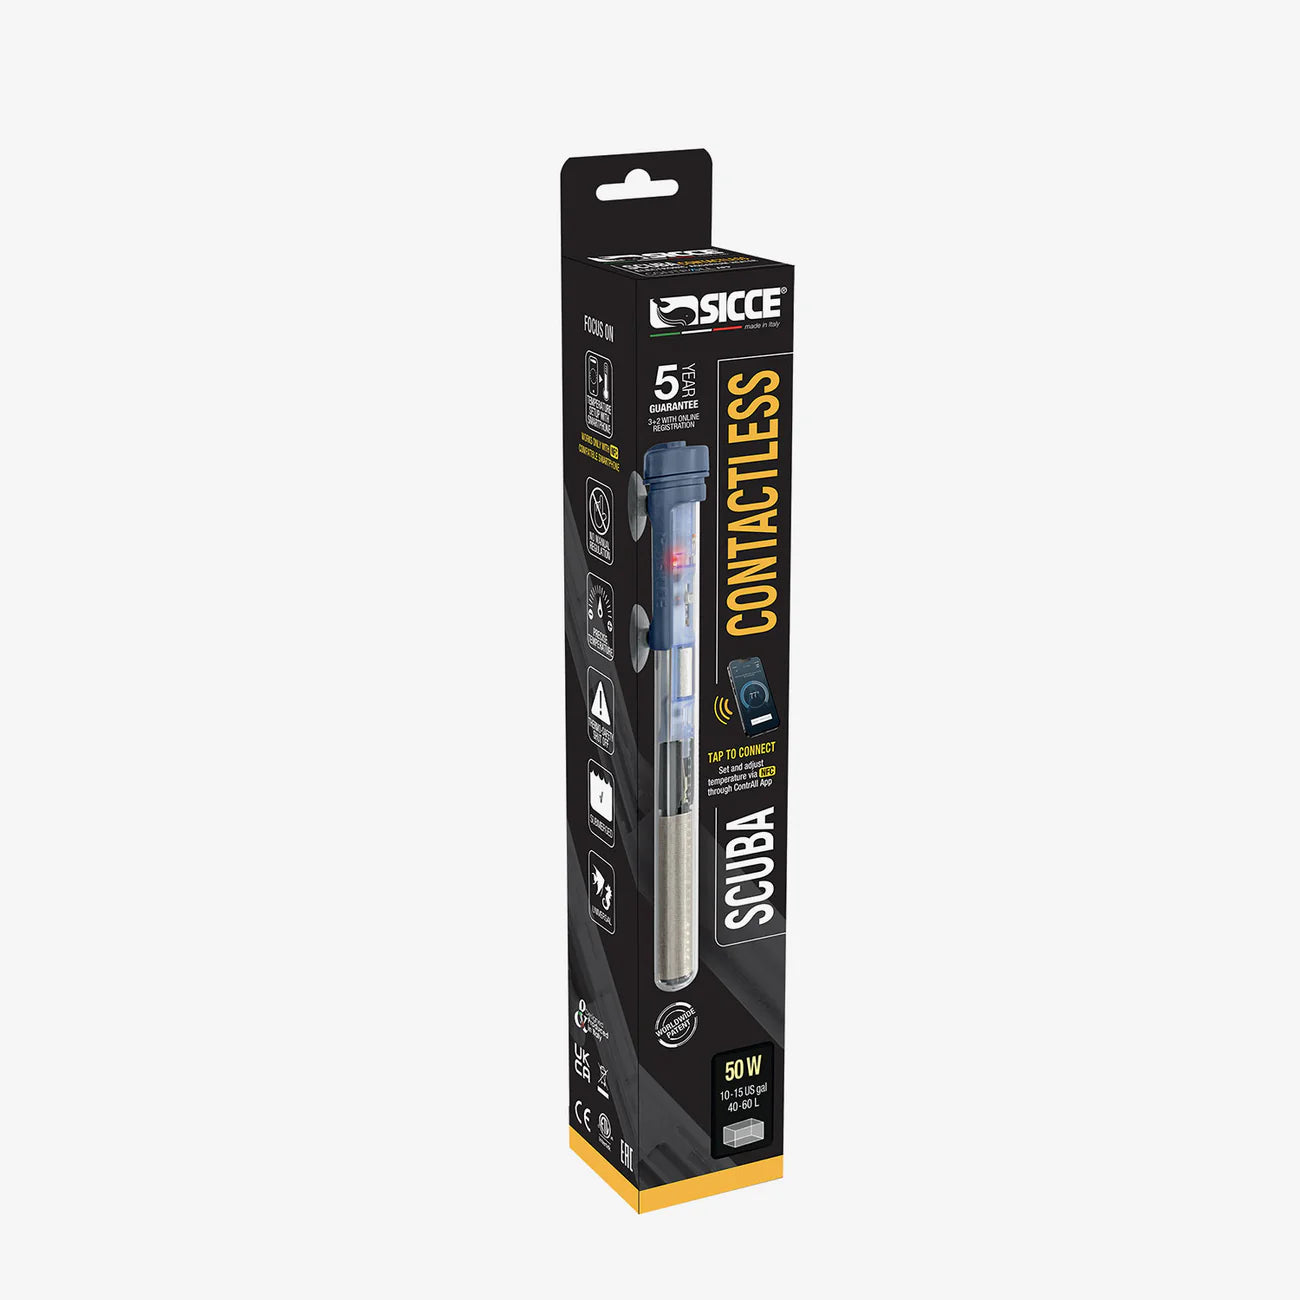 SCUBA ContactLess Submersible Heater 100 Watts - Y5025 - Serenity Provision